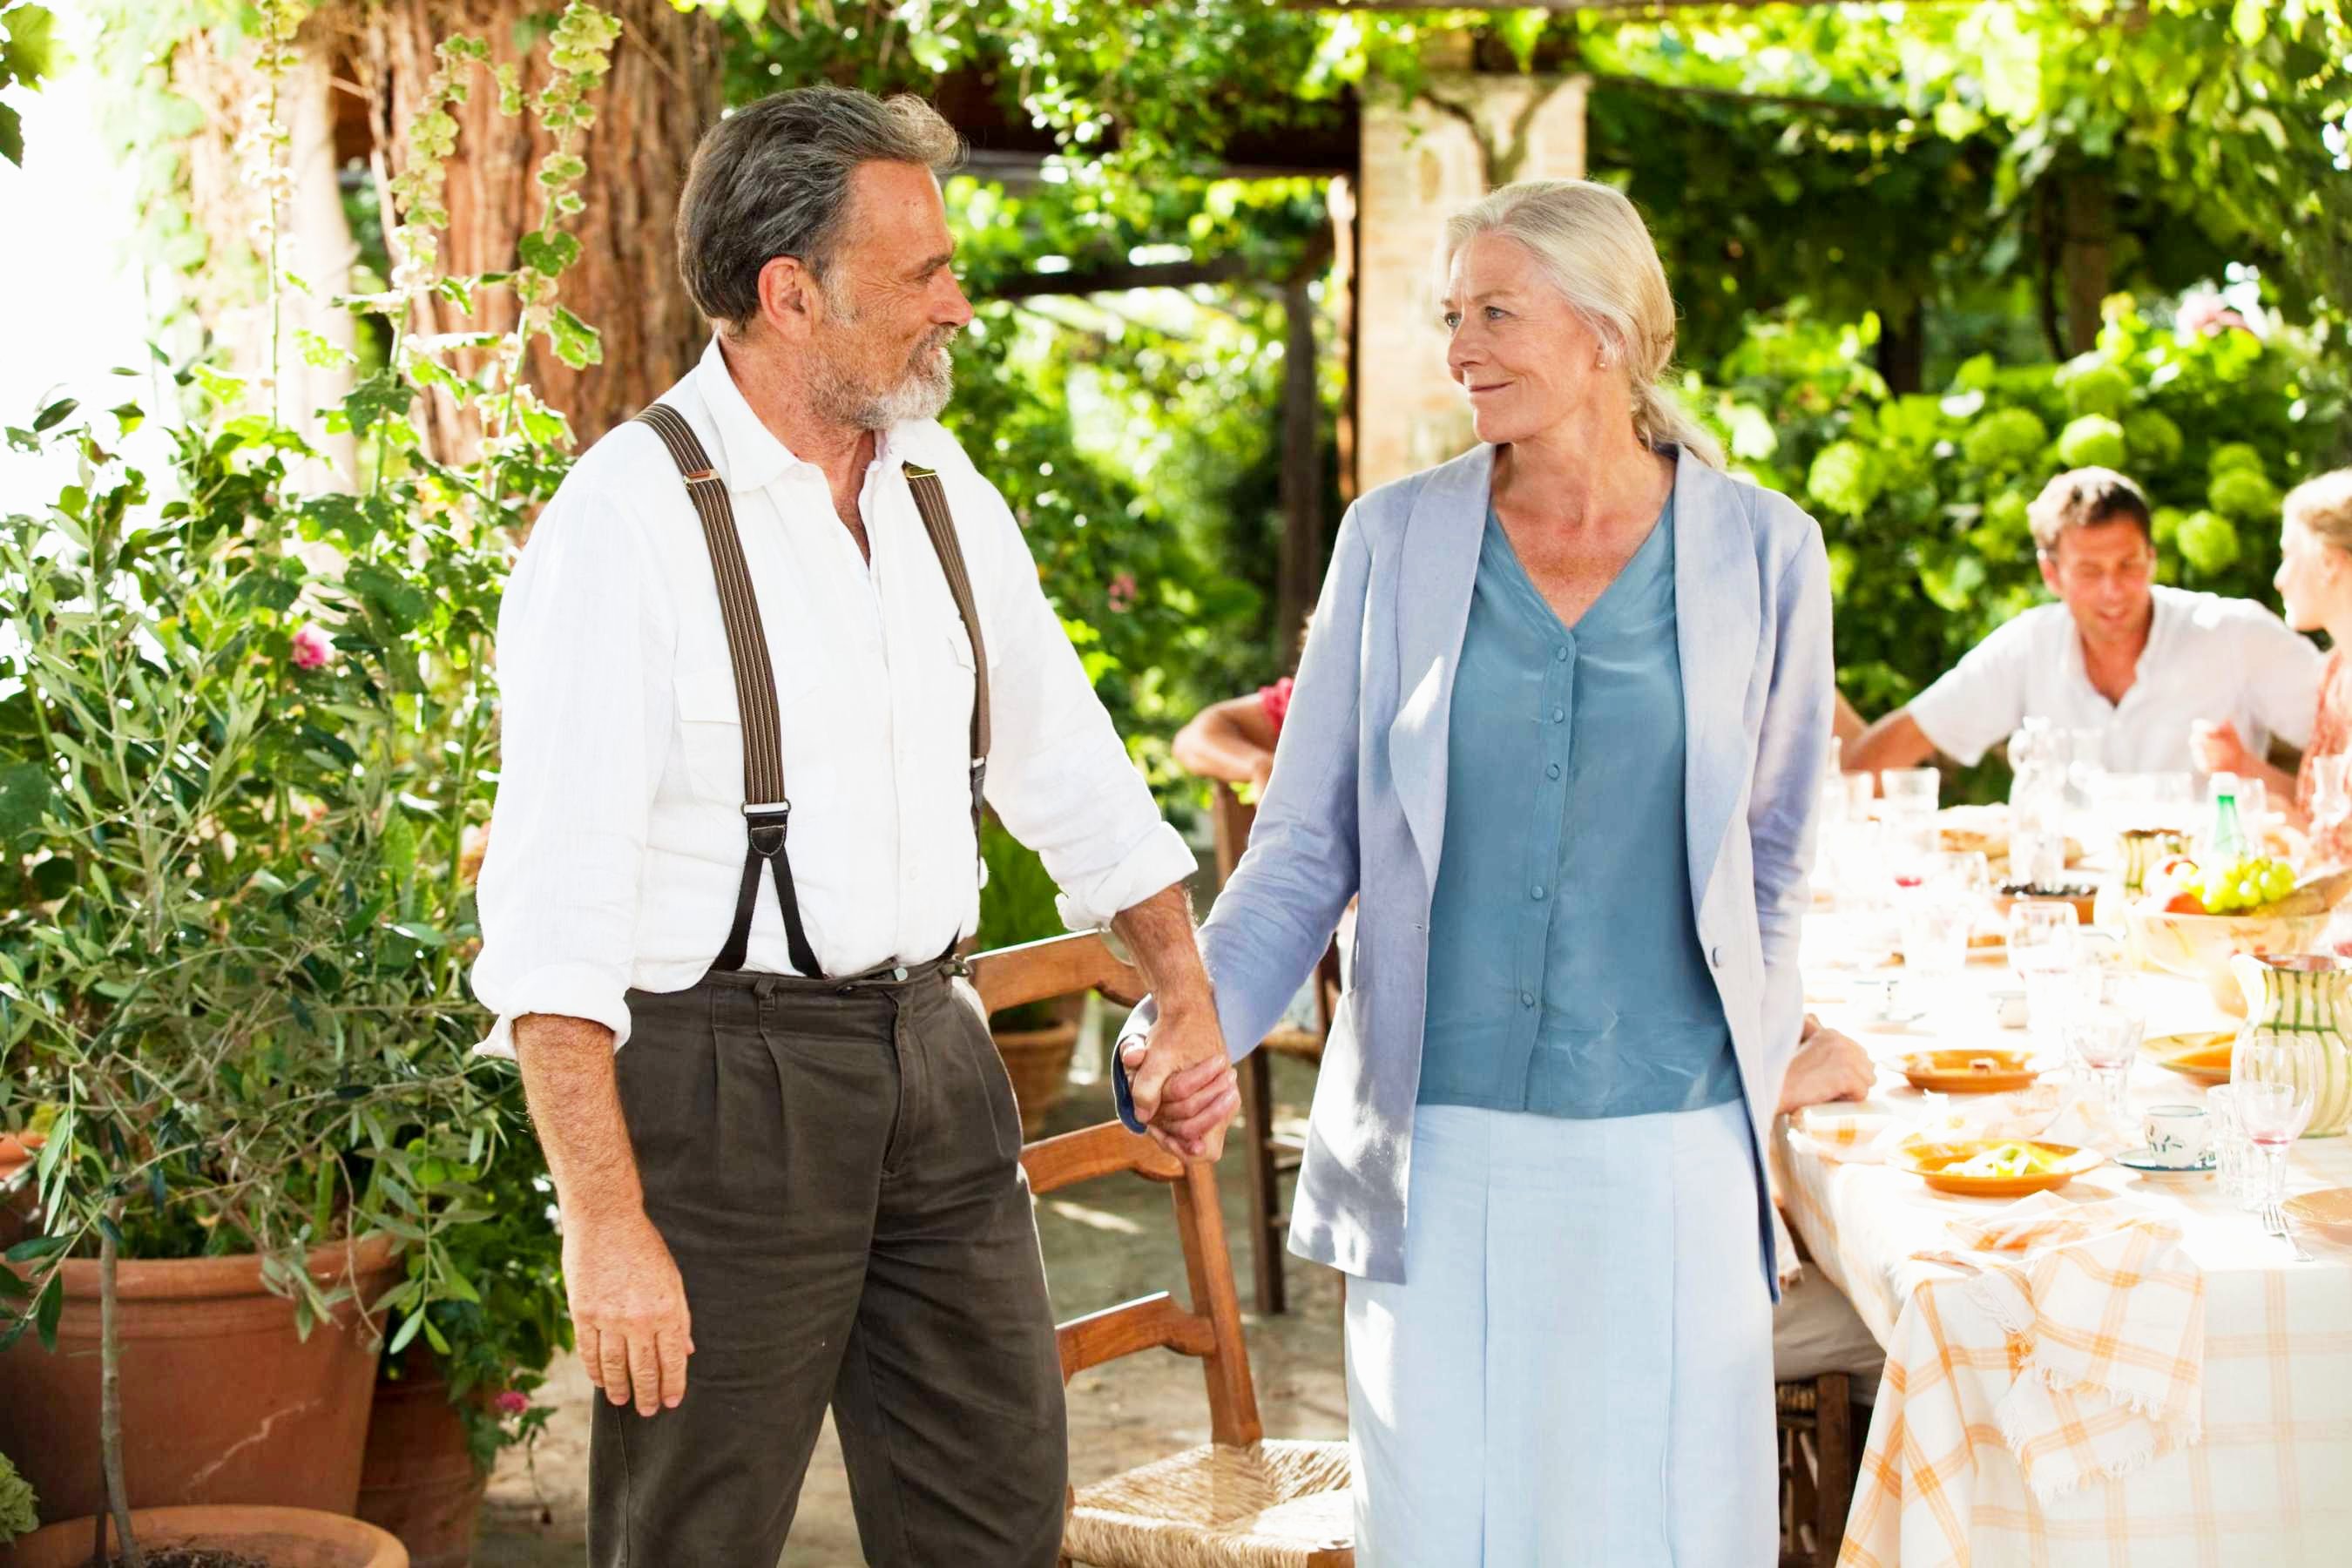 Franco Nero and Vanessa Redgrave (Claire Wyman) in Summit Entertainment's Letters to Juliet (2010). Photo credit by John Johnson.